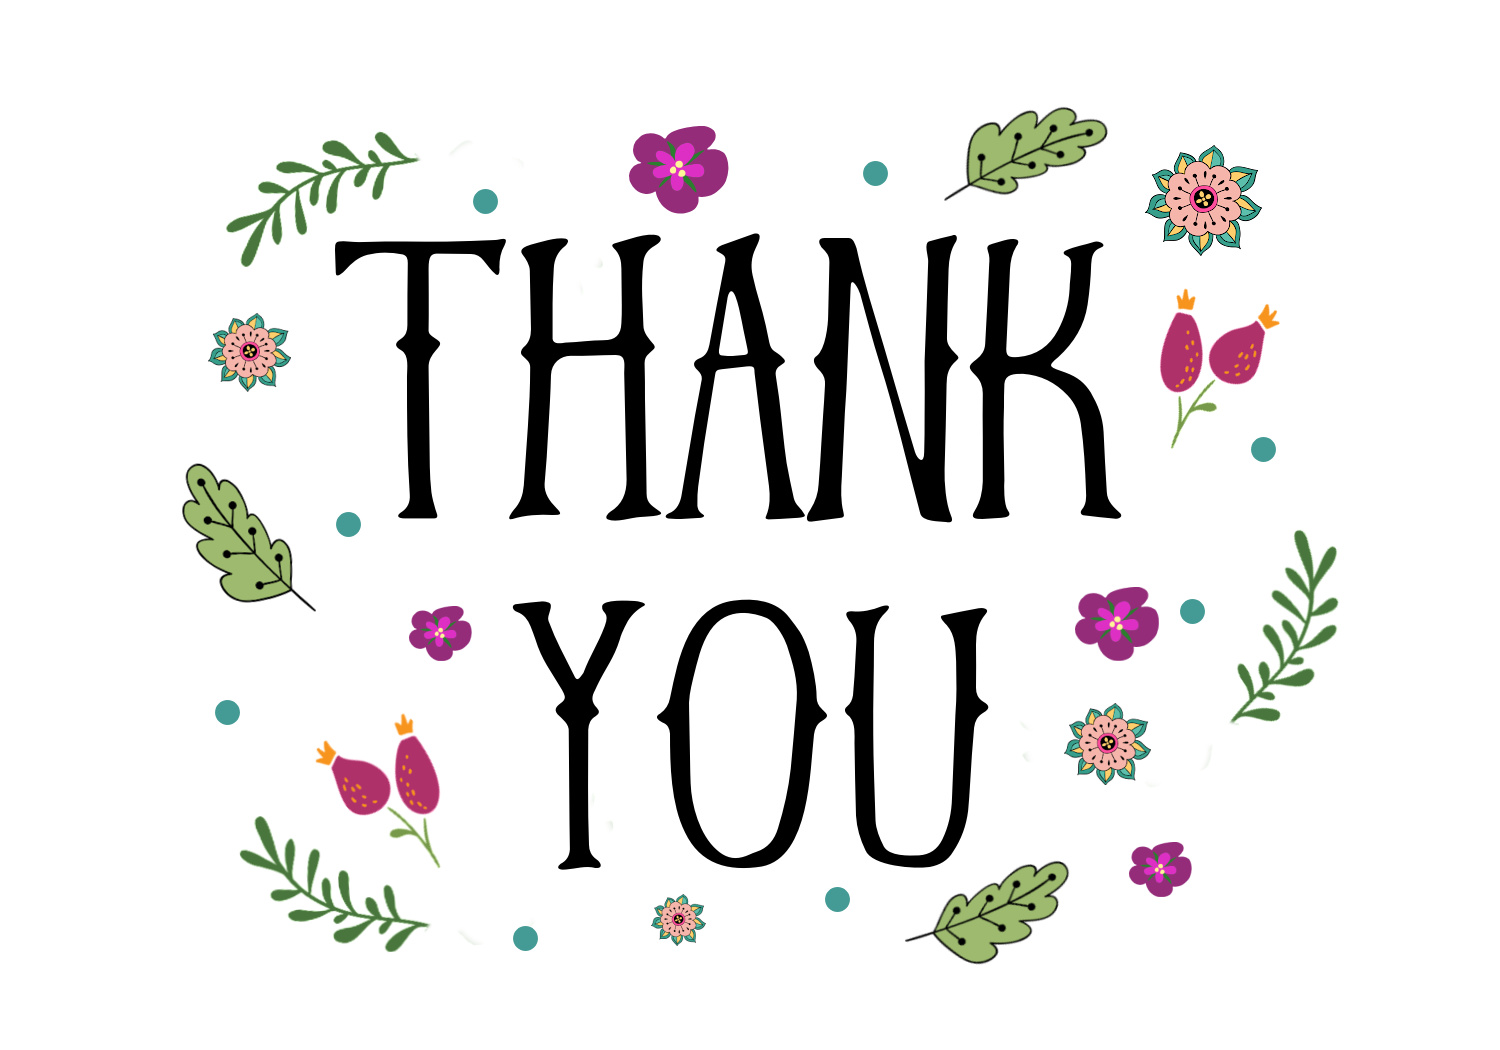 Thank you card design with leaves and colorful flowers.